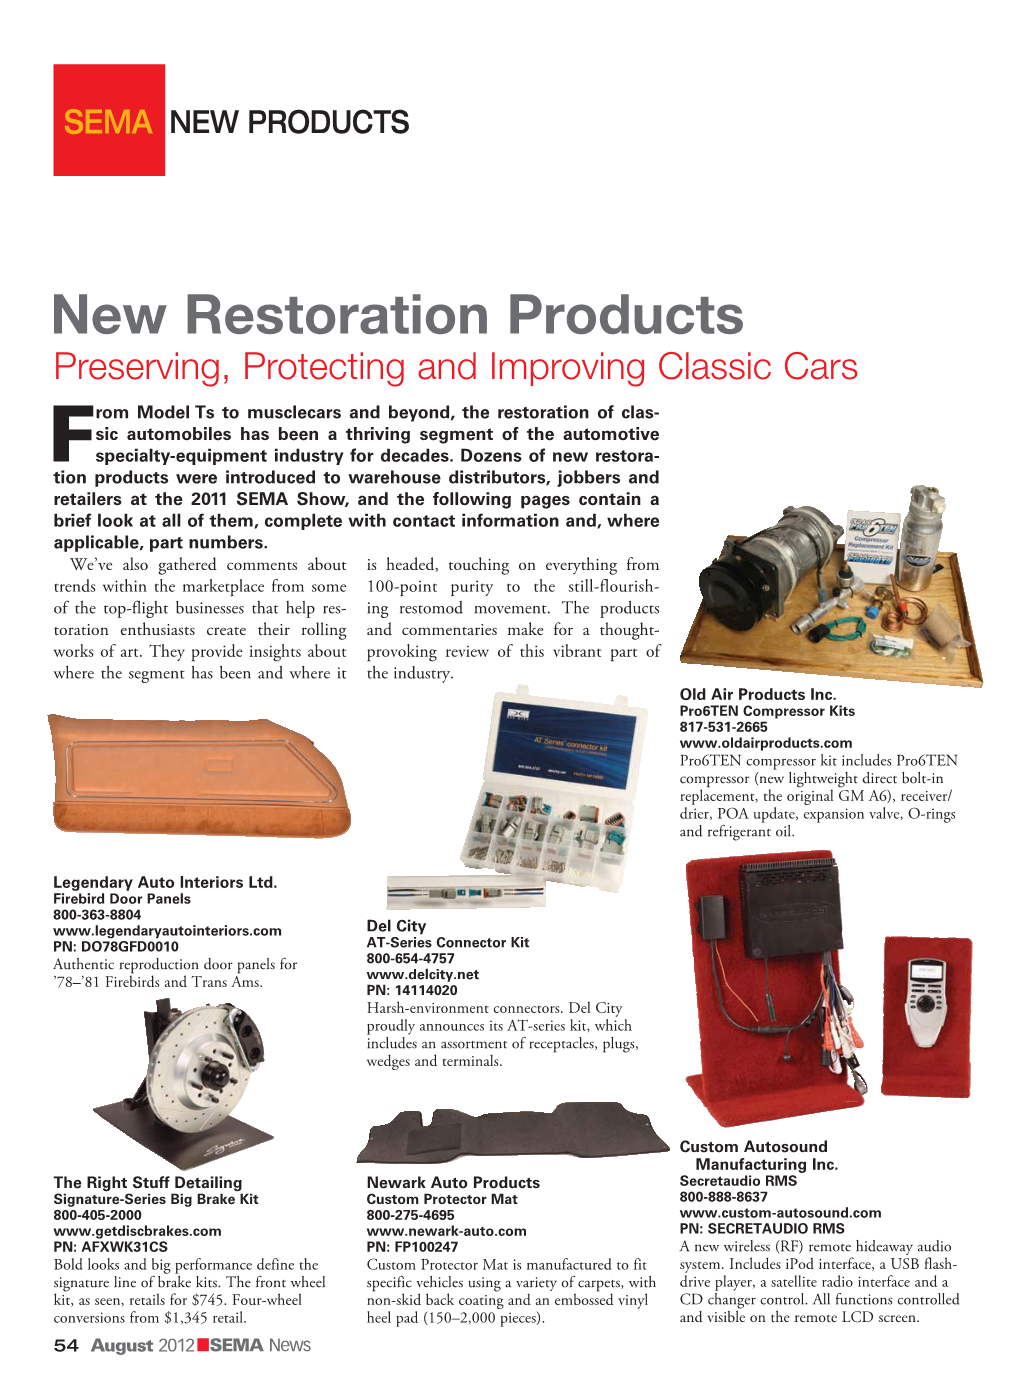 New Restoration Products